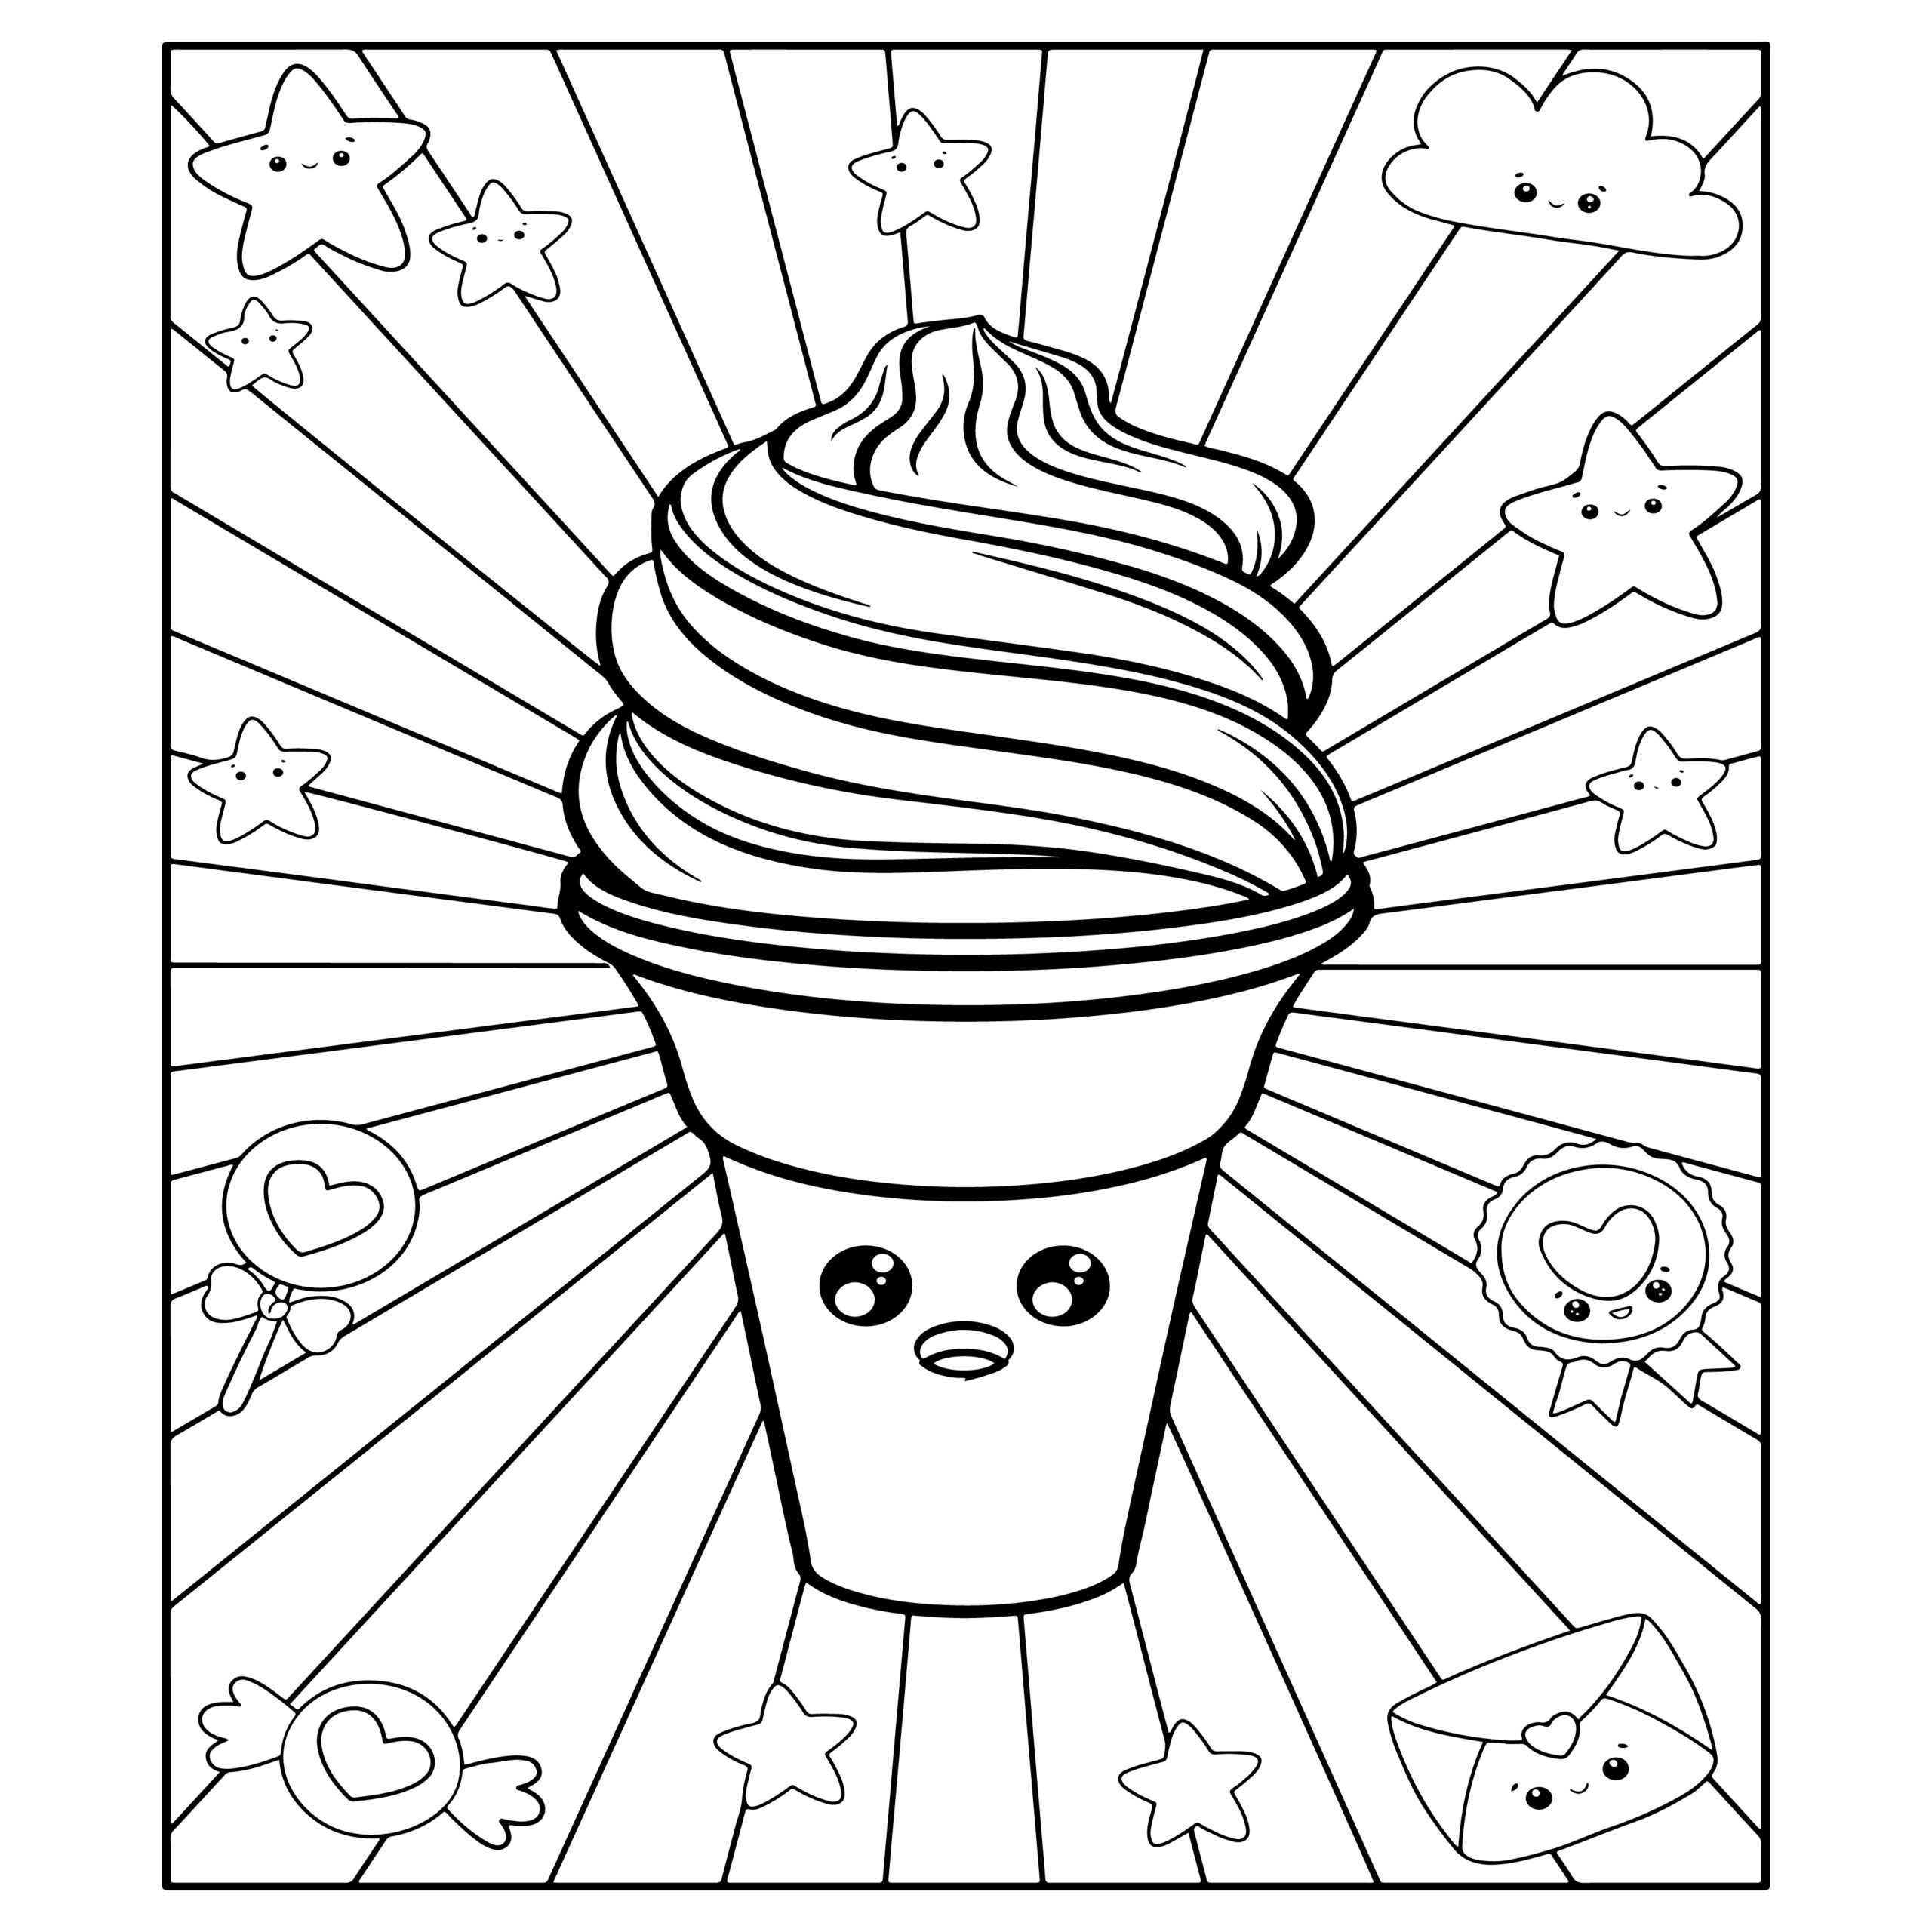 Cute kawaii food coloring book kawaii food coloring pages for kids made by teachers